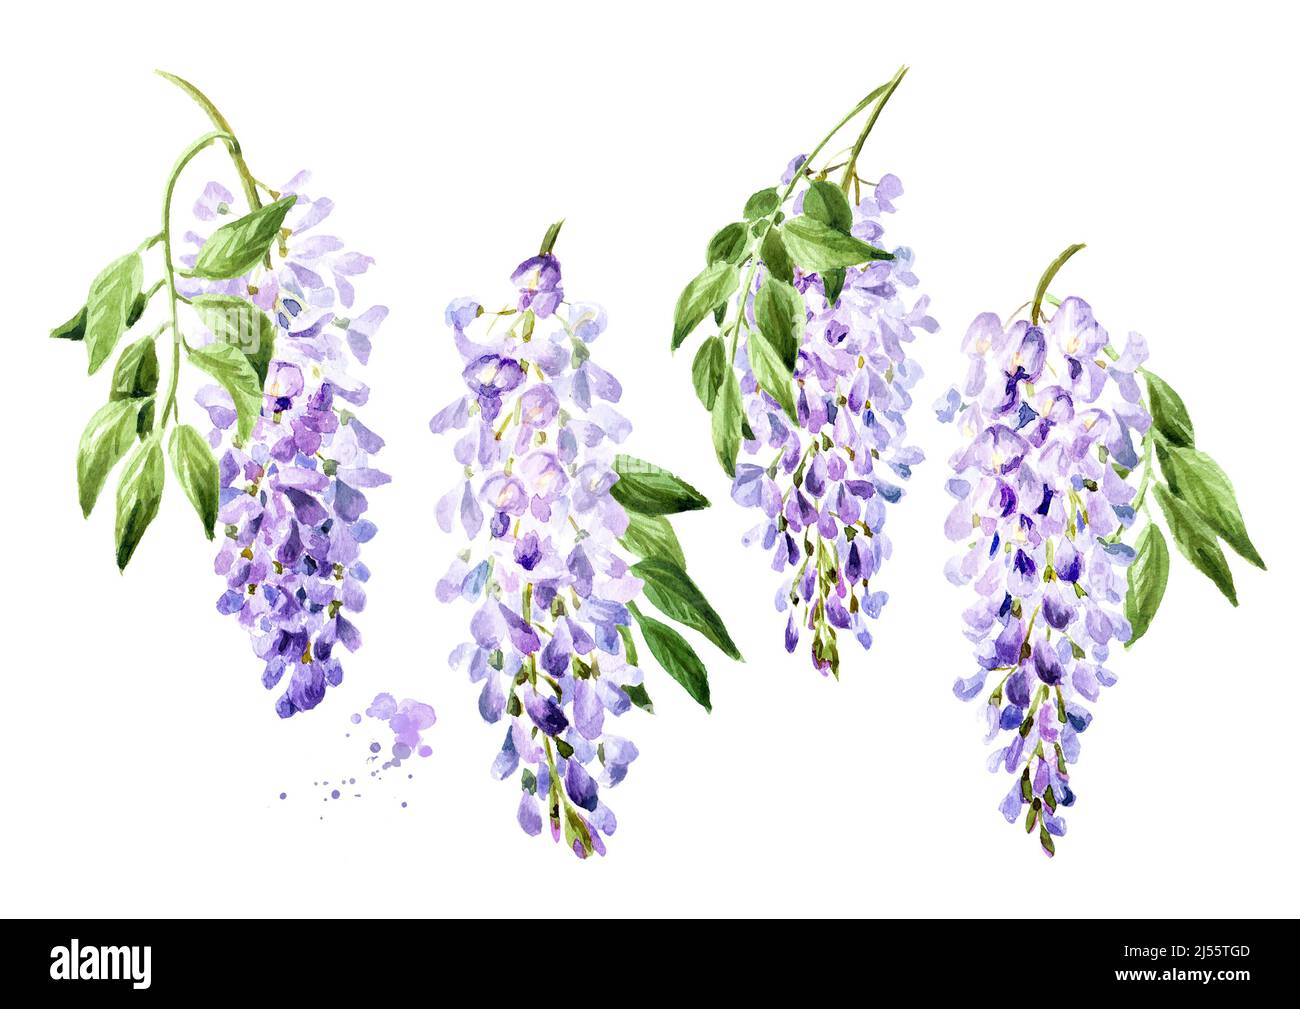 Purple pink blue wisteria flower branch blossom set. Hand drawn watercolor illustration, isolated on white background Stock Photo